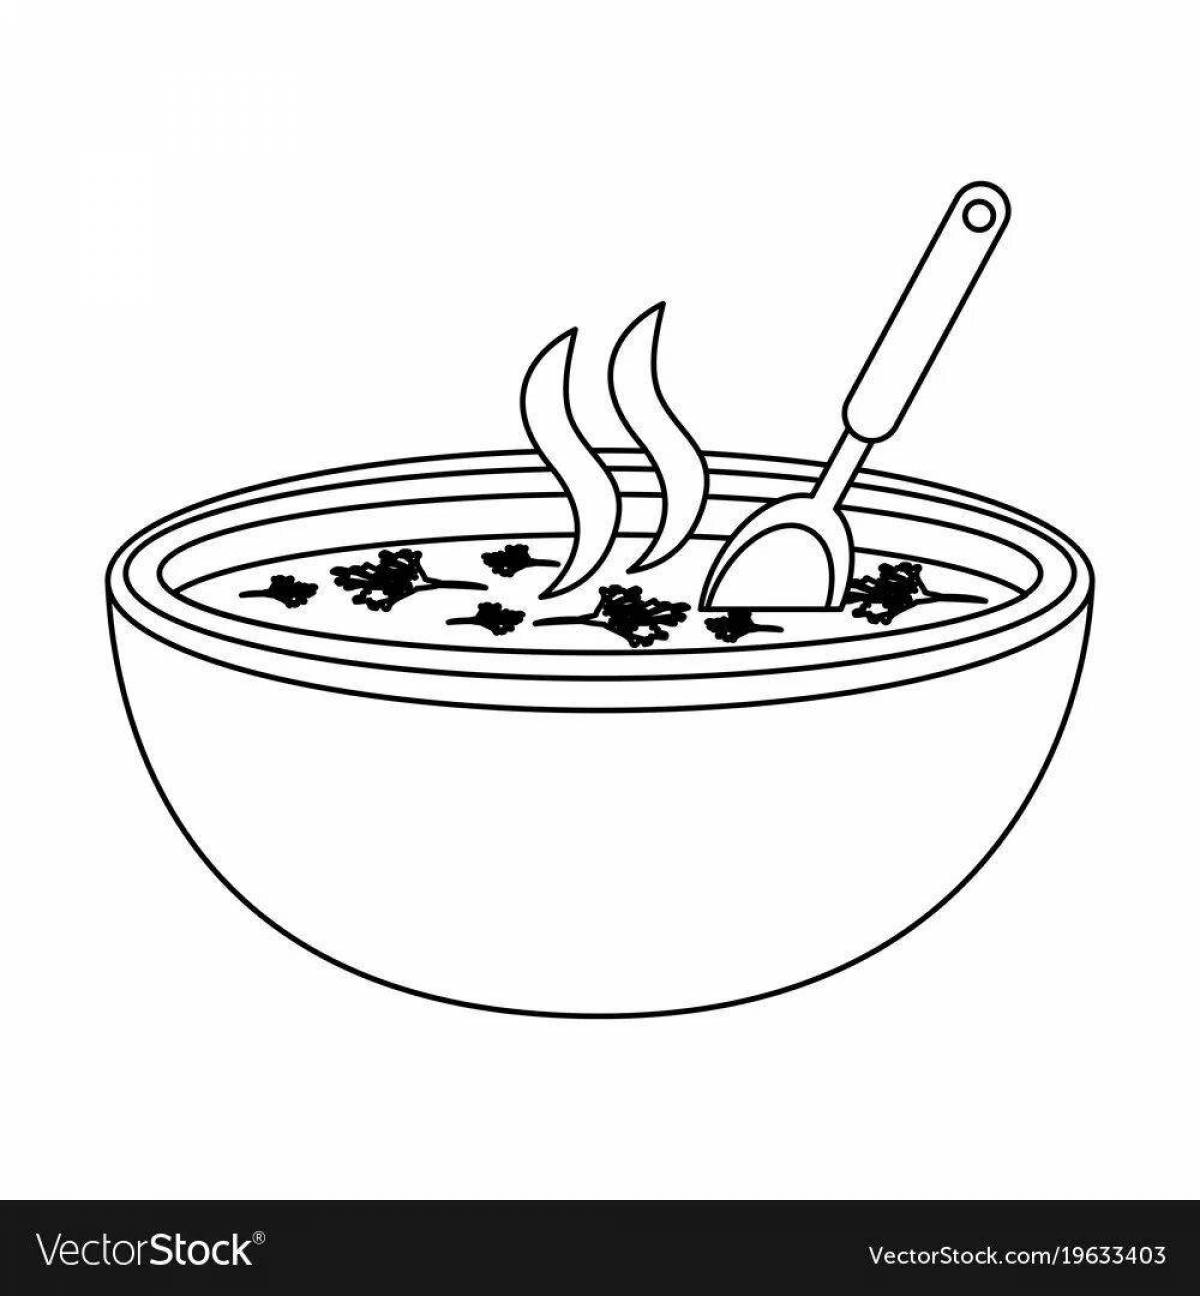 Modern soup plate coloring page